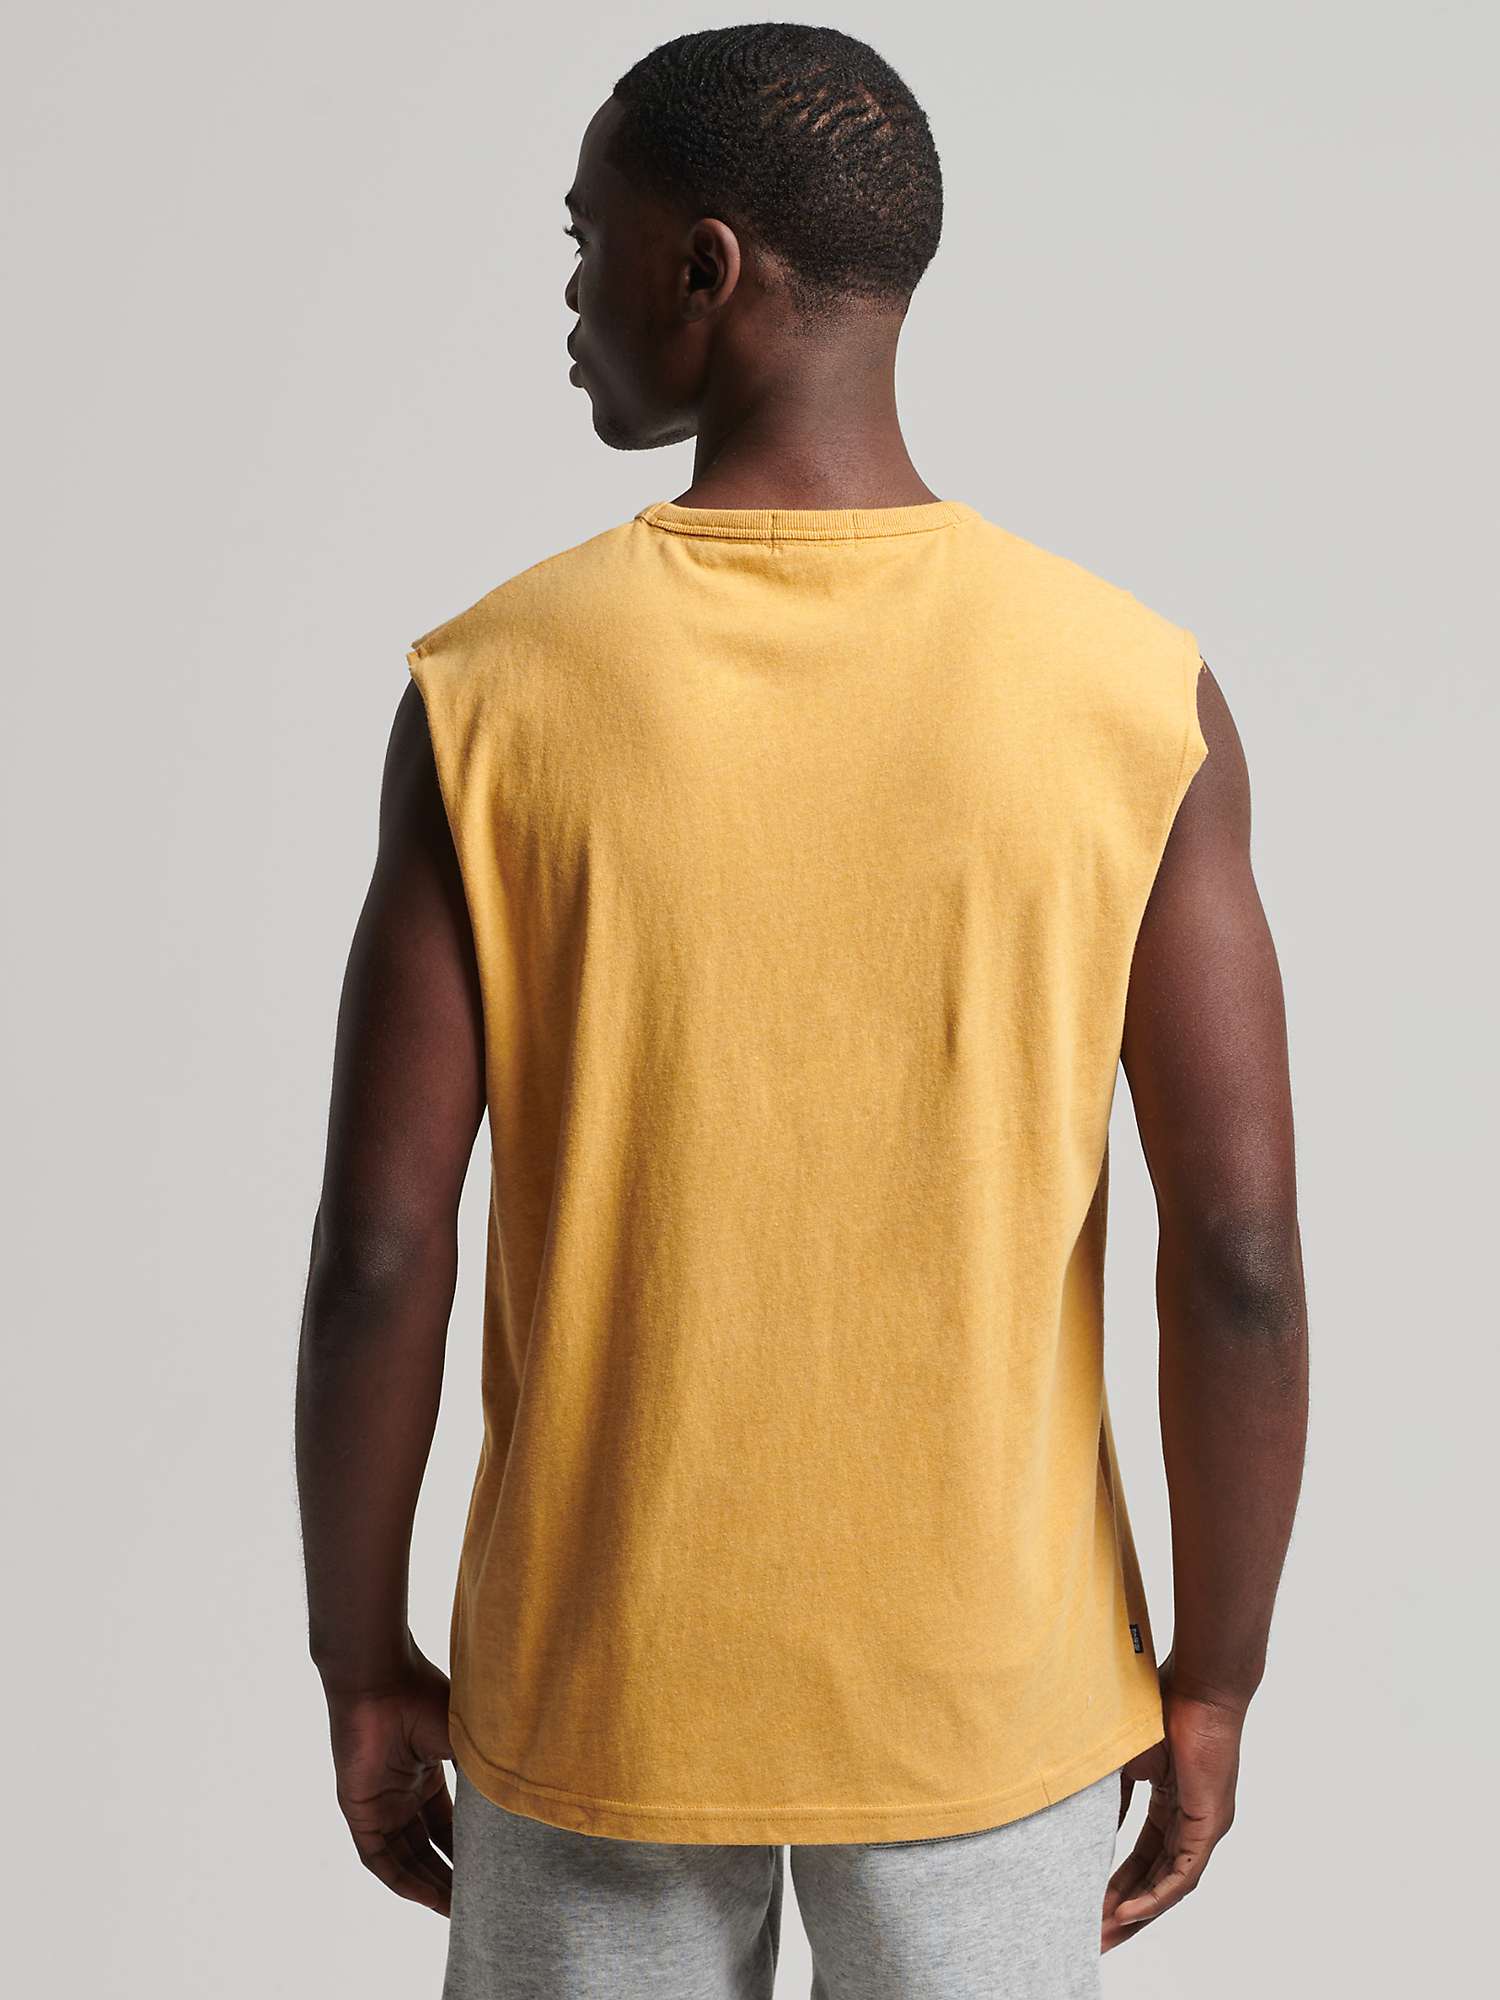 Buy Superdry Classic Organic Cotton Tank Top Online at johnlewis.com